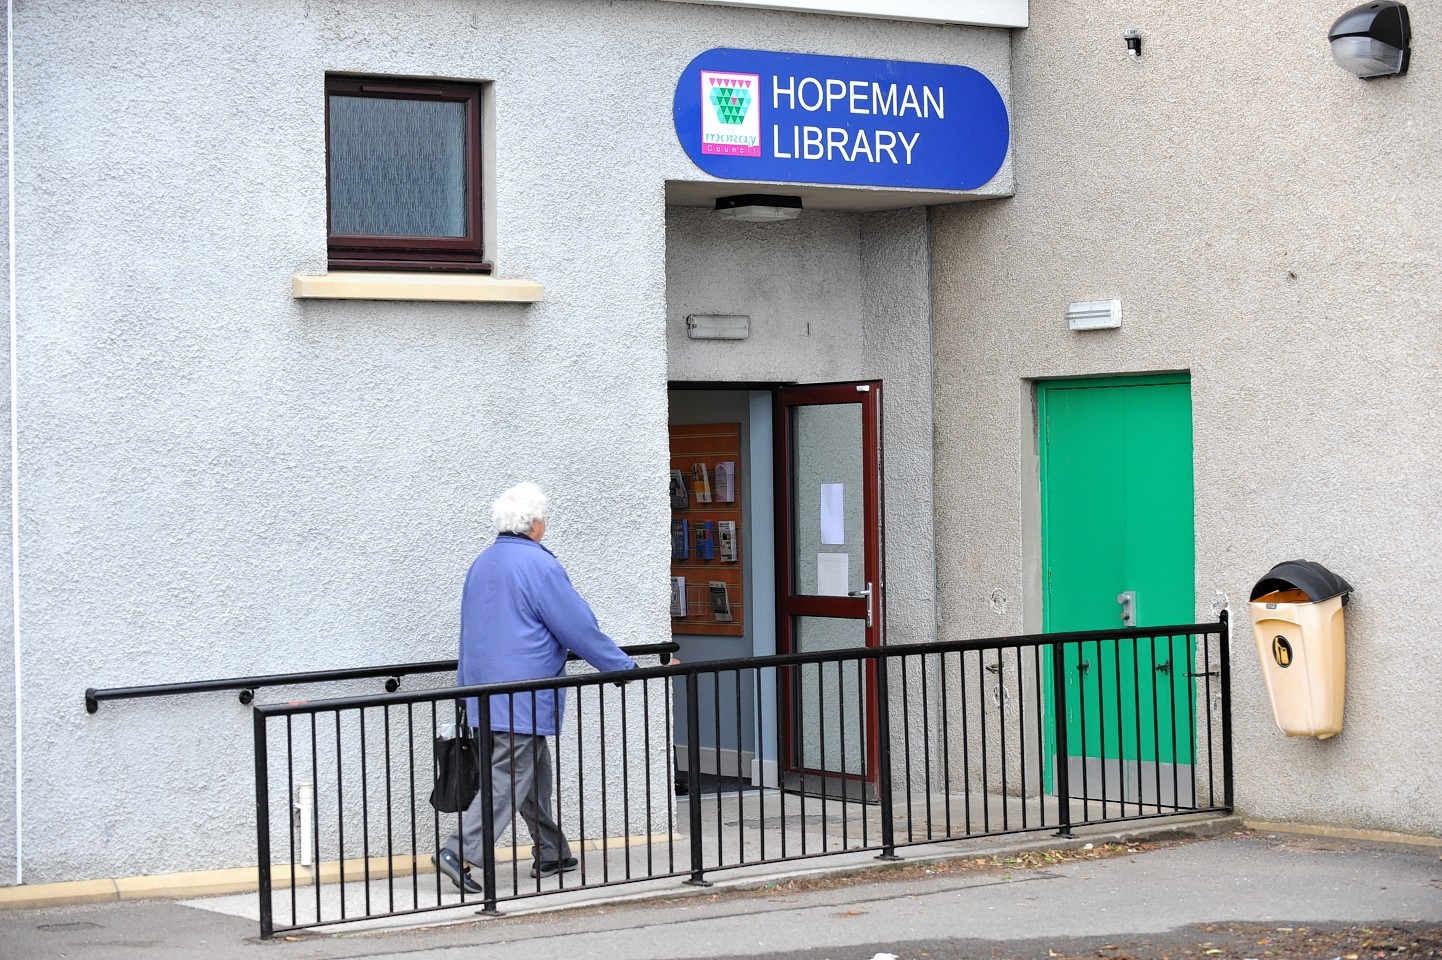 Hopeman Library is to permanently close, despite a battle to keep it open